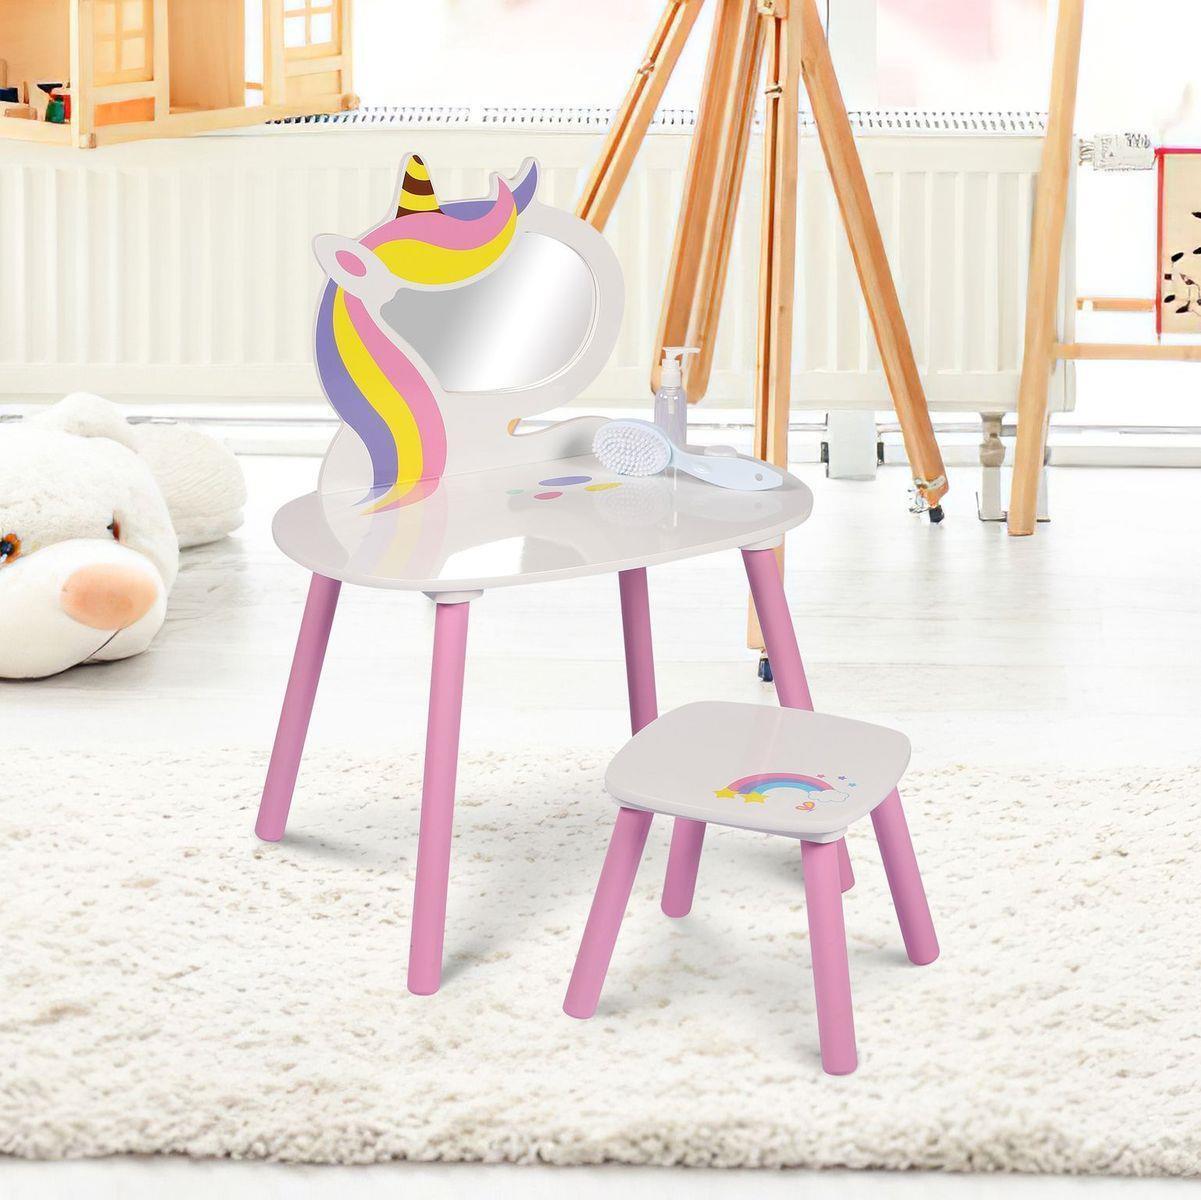 The Magic Toy Shop Vanity Set Princess Vanity Table with Stool Kids Play Toy